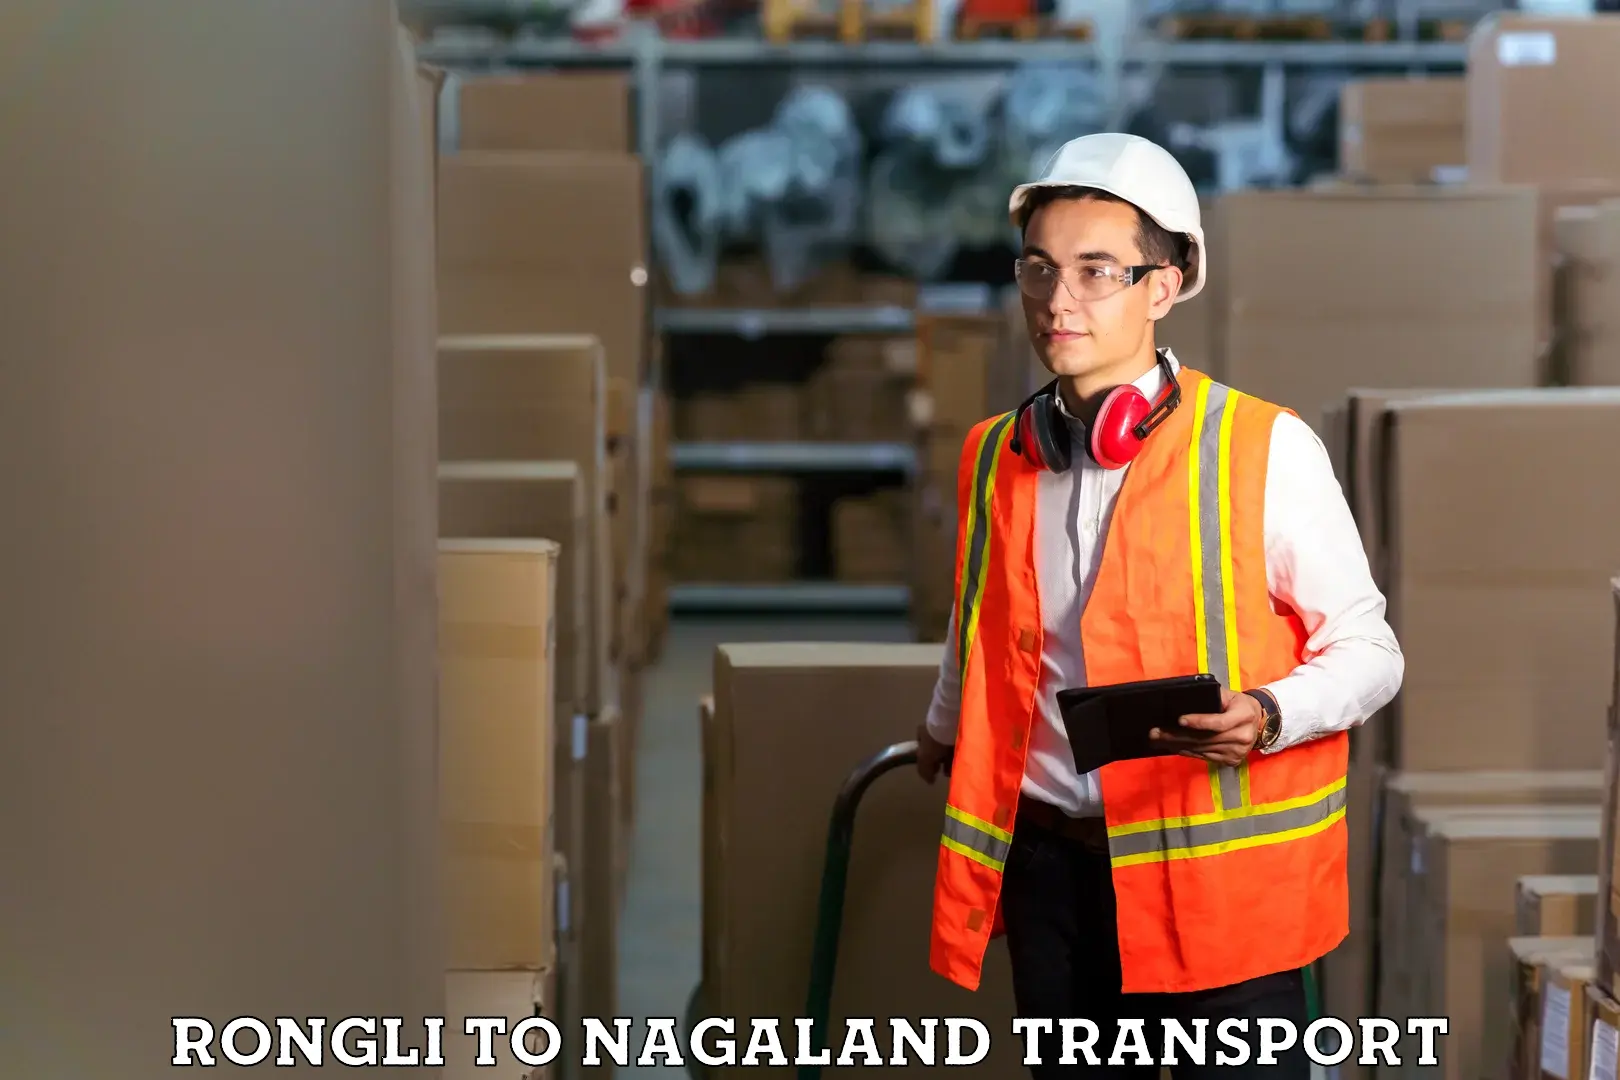 Commercial transport service Rongli to Nagaland